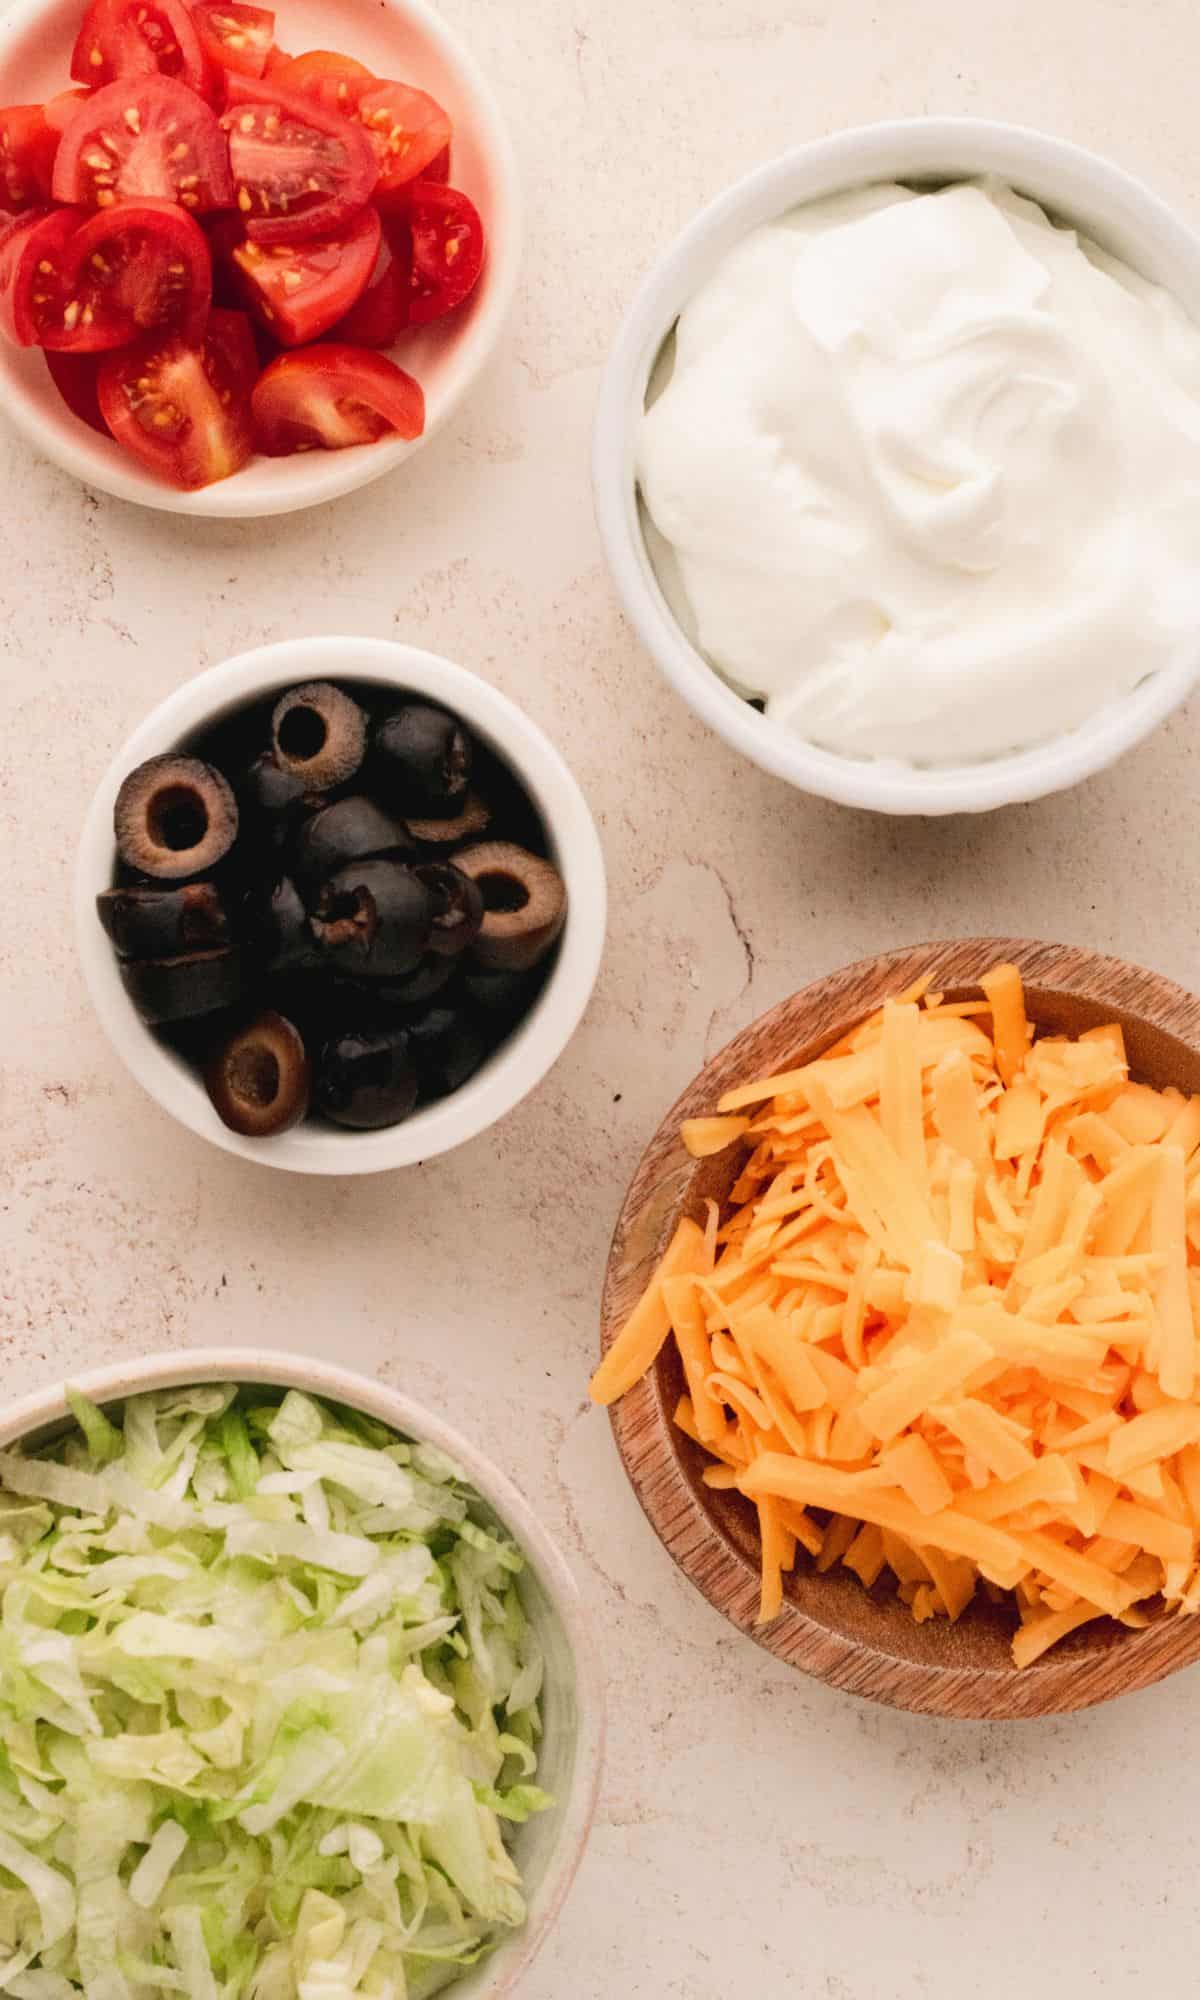 Taco cup toppings ingredients in varying bowl shapes and sizes.